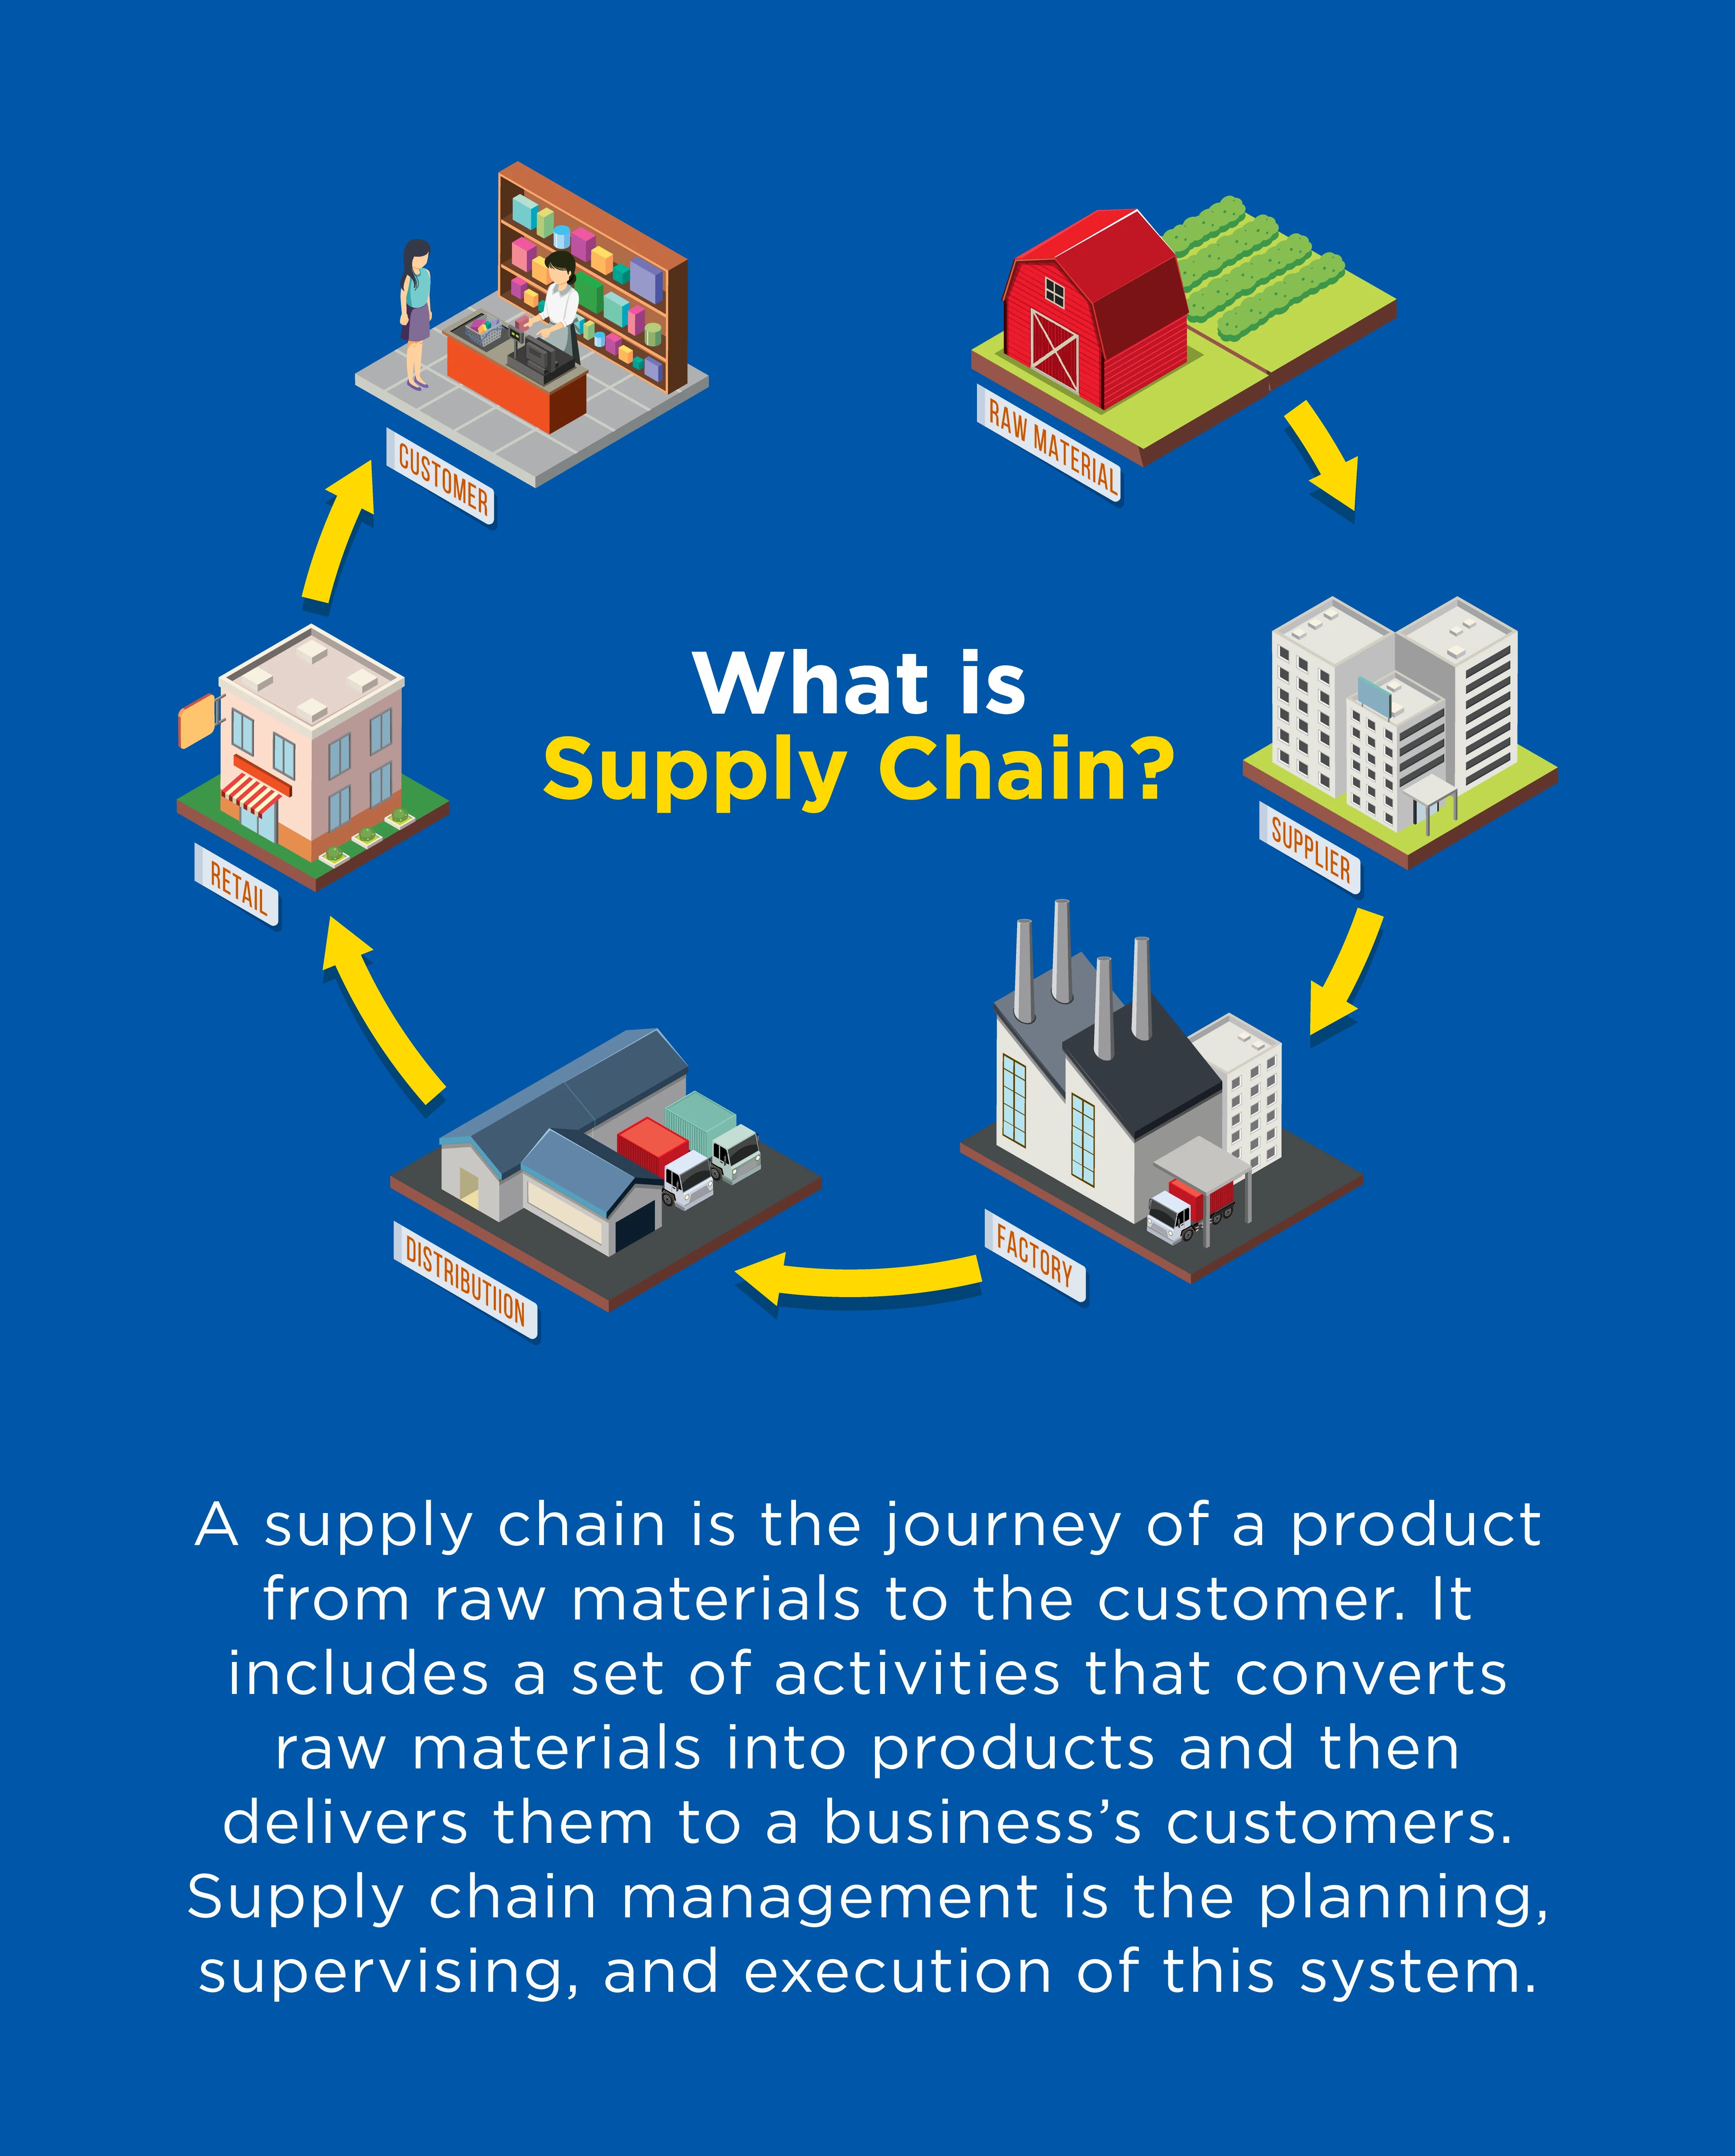 What is supply chain